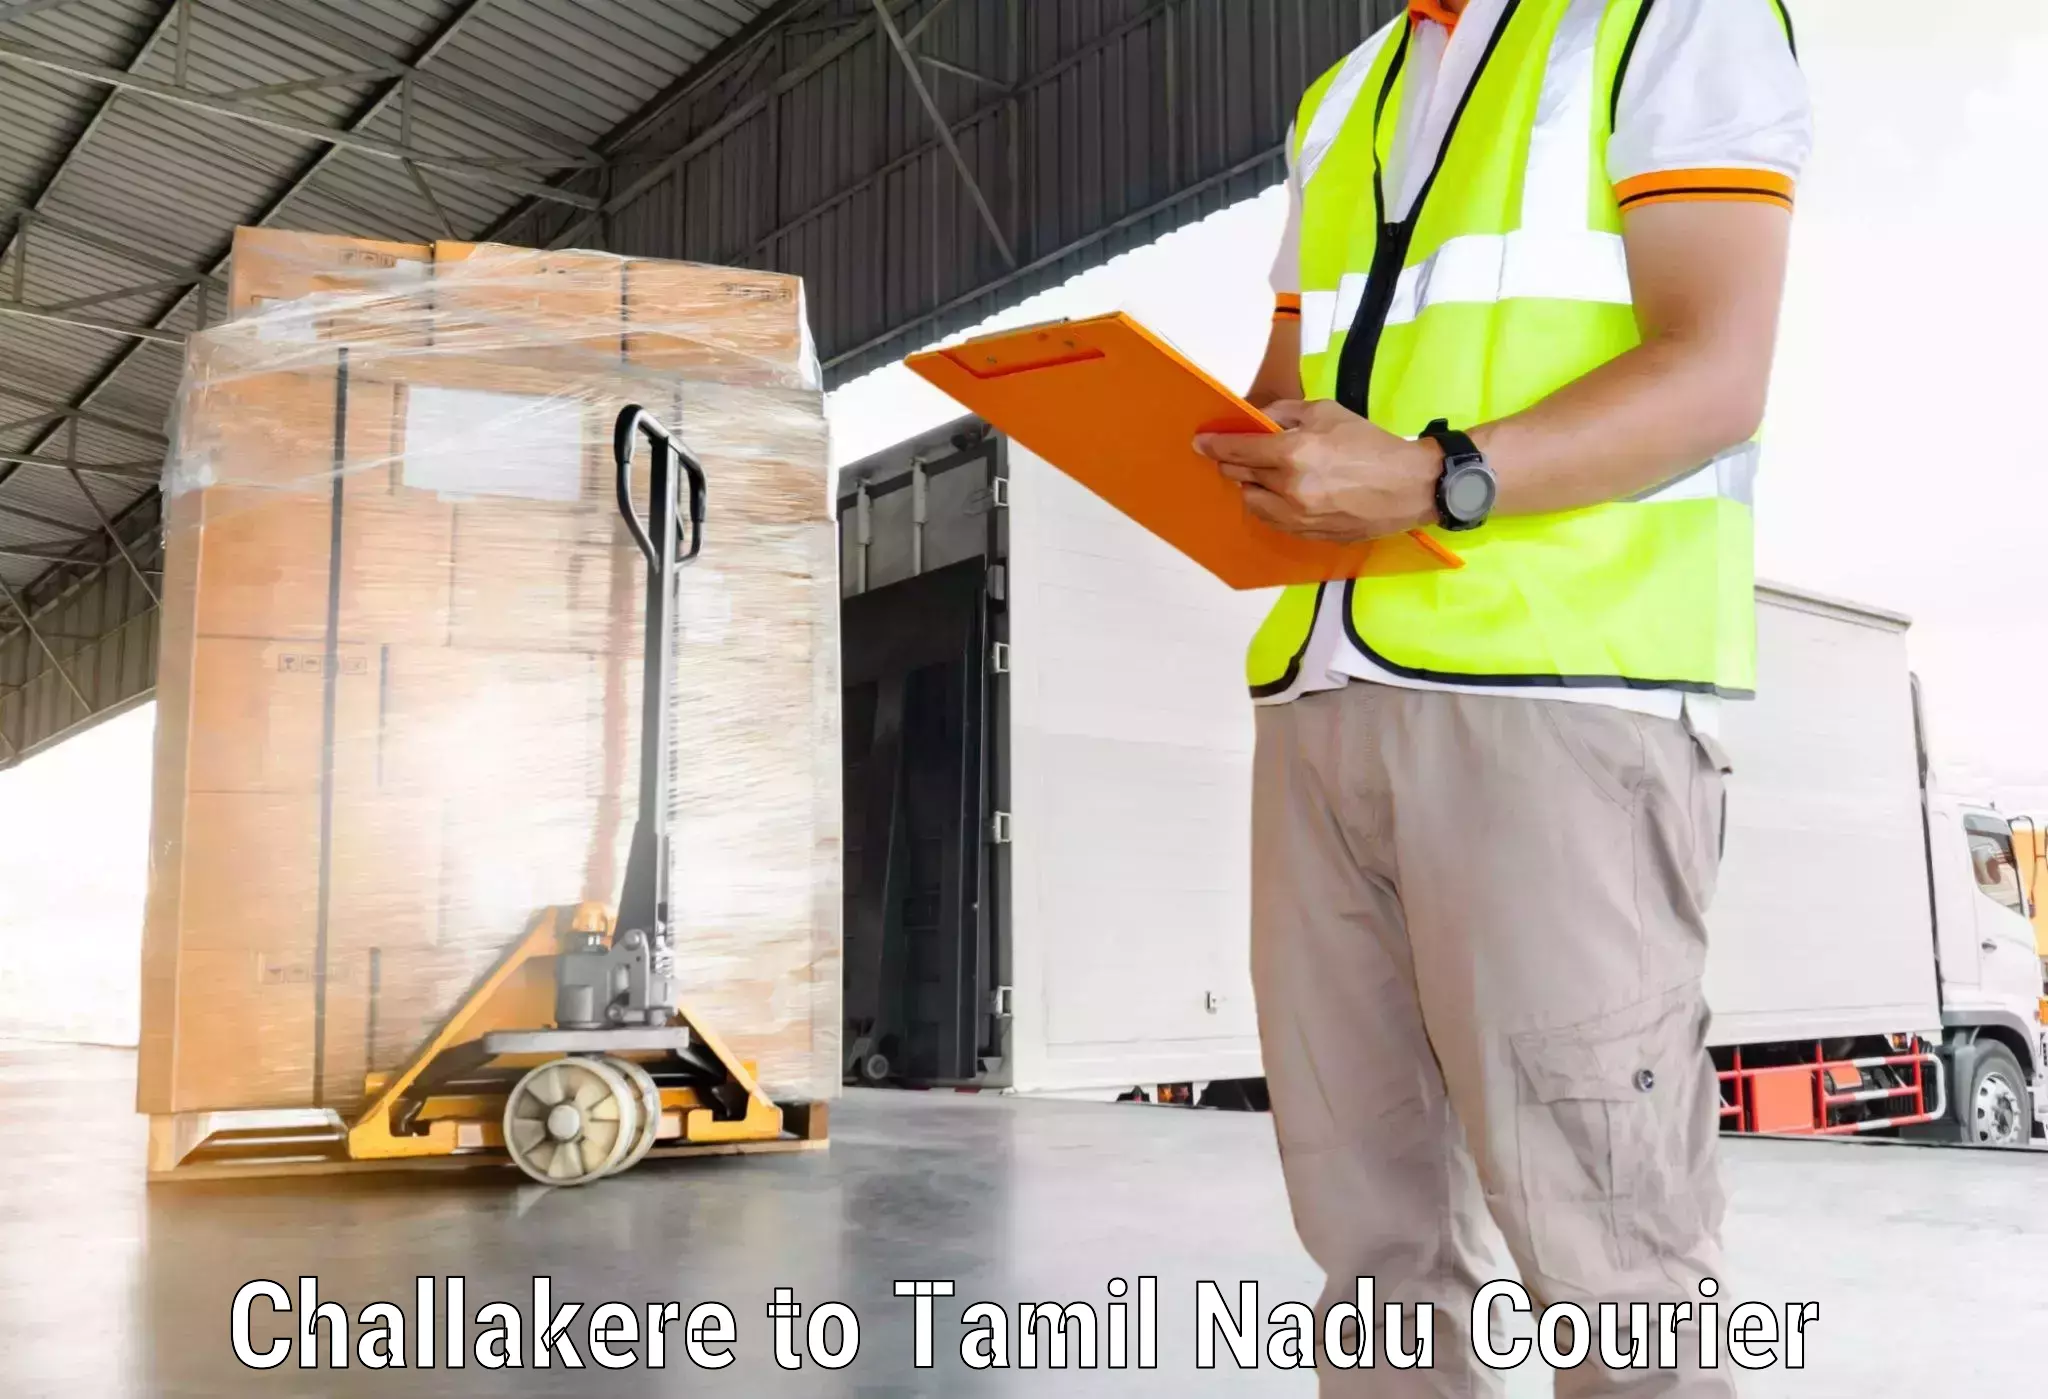 Efficient shipping operations Challakere to Perunali